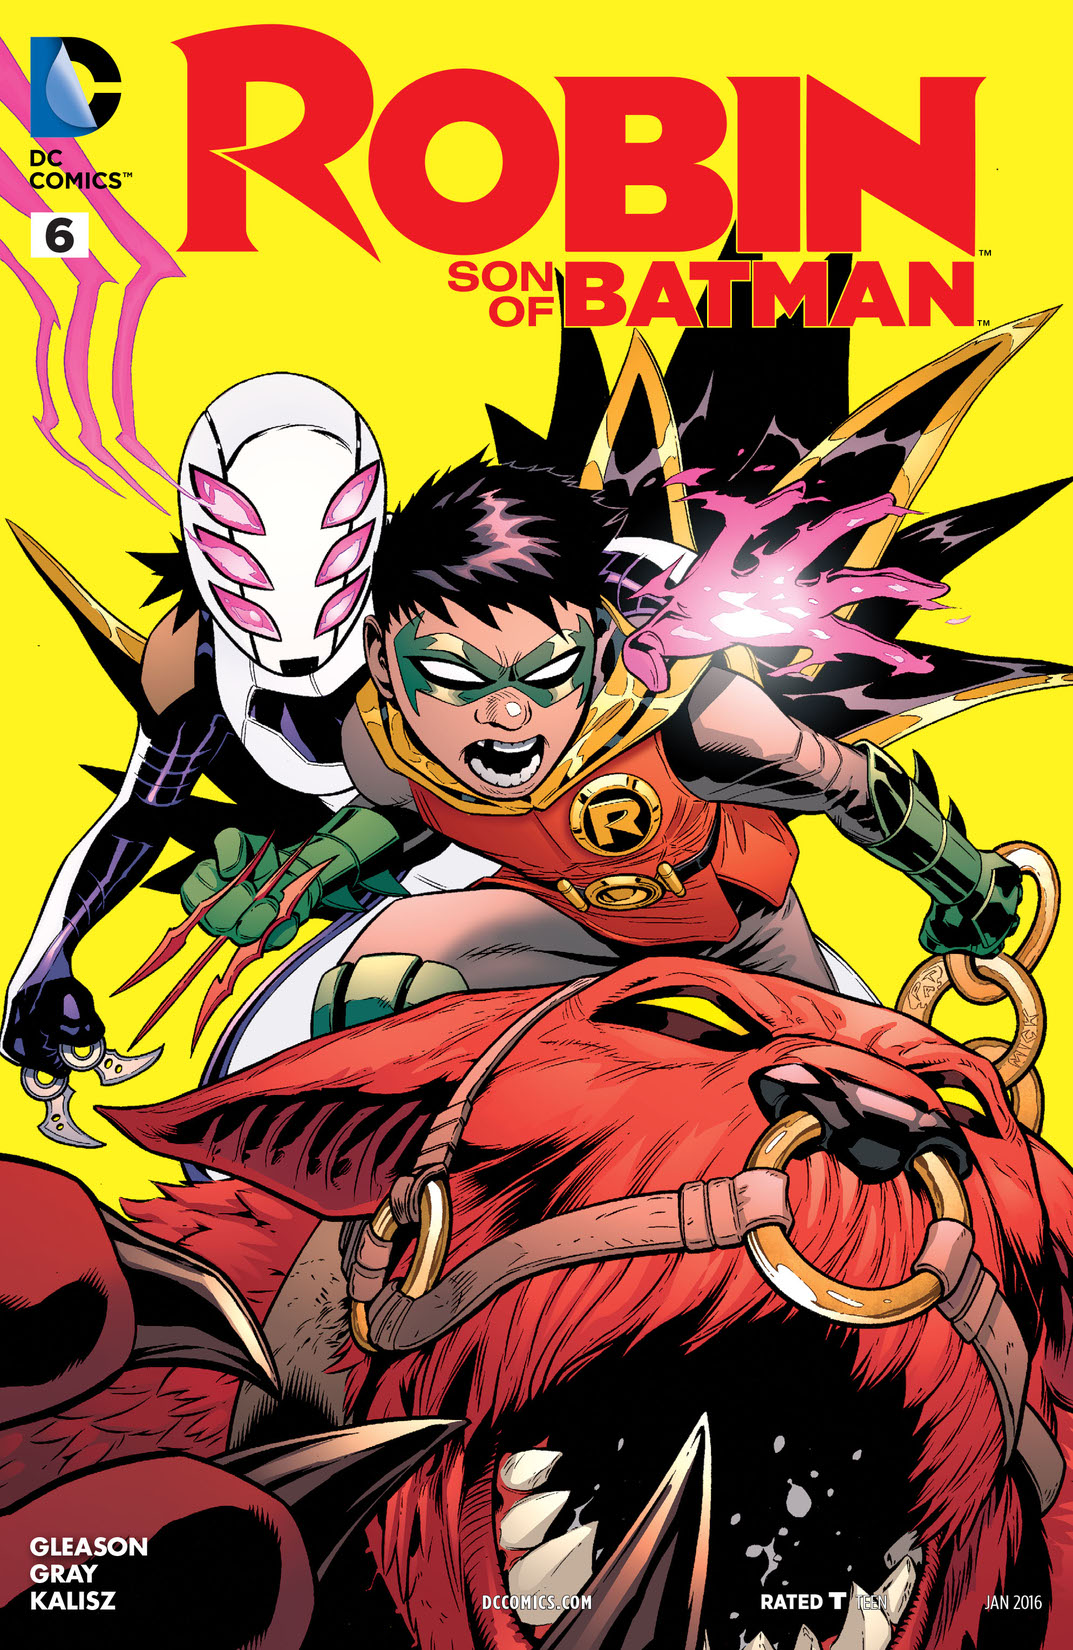 Robin: Son of Batman #6 preview images